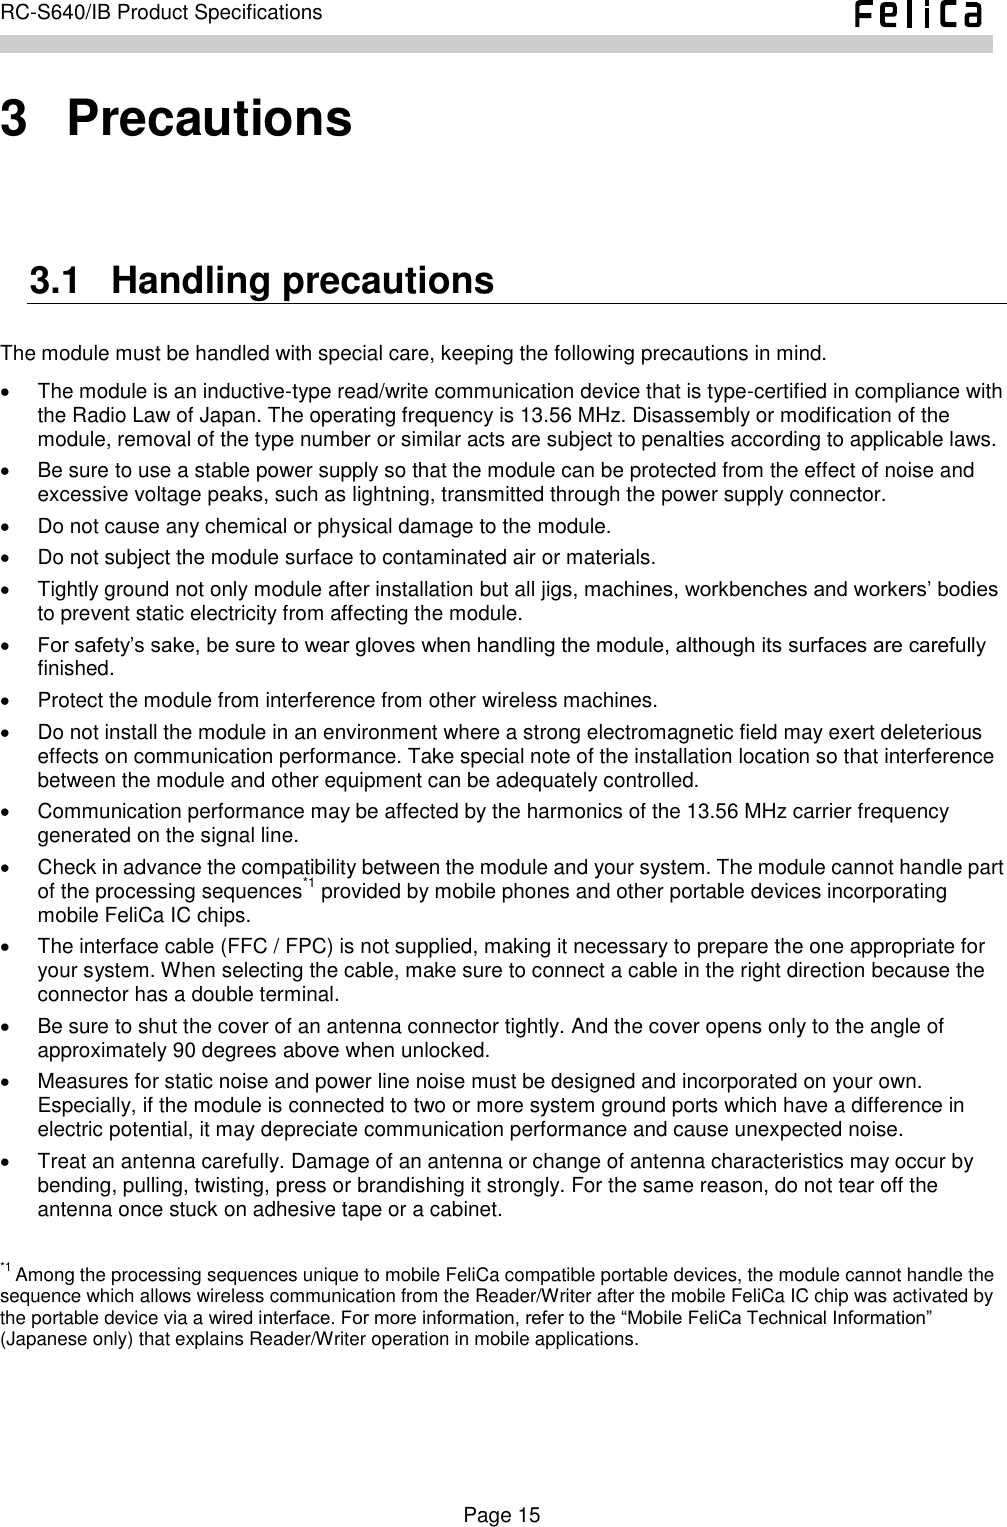    Page 15     RC-S640/IB Product Specifications    3   Precautions 3.1   Handling precautions The module must be handled with special care, keeping the following precautions in mind.   The module is an inductive-type read/write communication device that is type-certified in compliance with the Radio Law of Japan. The operating frequency is 13.56 MHz. Disassembly or modification of the module, removal of the type number or similar acts are subject to penalties according to applicable laws.   Be sure to use a stable power supply so that the module can be protected from the effect of noise and excessive voltage peaks, such as lightning, transmitted through the power supply connector.   Do not cause any chemical or physical damage to the module.   Do not subject the module surface to contaminated air or materials.   Tightly ground not only module after installation but all jigs, machines, workbenches and workers’ bodies to prevent static electricity from affecting the module.  For safety’s sake, be sure to wear gloves when handling the module, although its surfaces are carefully finished.   Protect the module from interference from other wireless machines.   Do not install the module in an environment where a strong electromagnetic field may exert deleterious effects on communication performance. Take special note of the installation location so that interference between the module and other equipment can be adequately controlled.   Communication performance may be affected by the harmonics of the 13.56 MHz carrier frequency generated on the signal line.   Check in advance the compatibility between the module and your system. The module cannot handle part of the processing sequences*1 provided by mobile phones and other portable devices incorporating mobile FeliCa IC chips.   The interface cable (FFC / FPC) is not supplied, making it necessary to prepare the one appropriate for your system. When selecting the cable, make sure to connect a cable in the right direction because the connector has a double terminal.   Be sure to shut the cover of an antenna connector tightly. And the cover opens only to the angle of approximately 90 degrees above when unlocked.   Measures for static noise and power line noise must be designed and incorporated on your own. Especially, if the module is connected to two or more system ground ports which have a difference in electric potential, it may depreciate communication performance and cause unexpected noise.   Treat an antenna carefully. Damage of an antenna or change of antenna characteristics may occur by bending, pulling, twisting, press or brandishing it strongly. For the same reason, do not tear off the antenna once stuck on adhesive tape or a cabinet.  *1 Among the processing sequences unique to mobile FeliCa compatible portable devices, the module cannot handle the sequence which allows wireless communication from the Reader/Writer after the mobile FeliCa IC chip was activated by the portable device via a wired interface. For more information, refer to the “Mobile FeliCa Technical Information” (Japanese only) that explains Reader/Writer operation in mobile applications. 